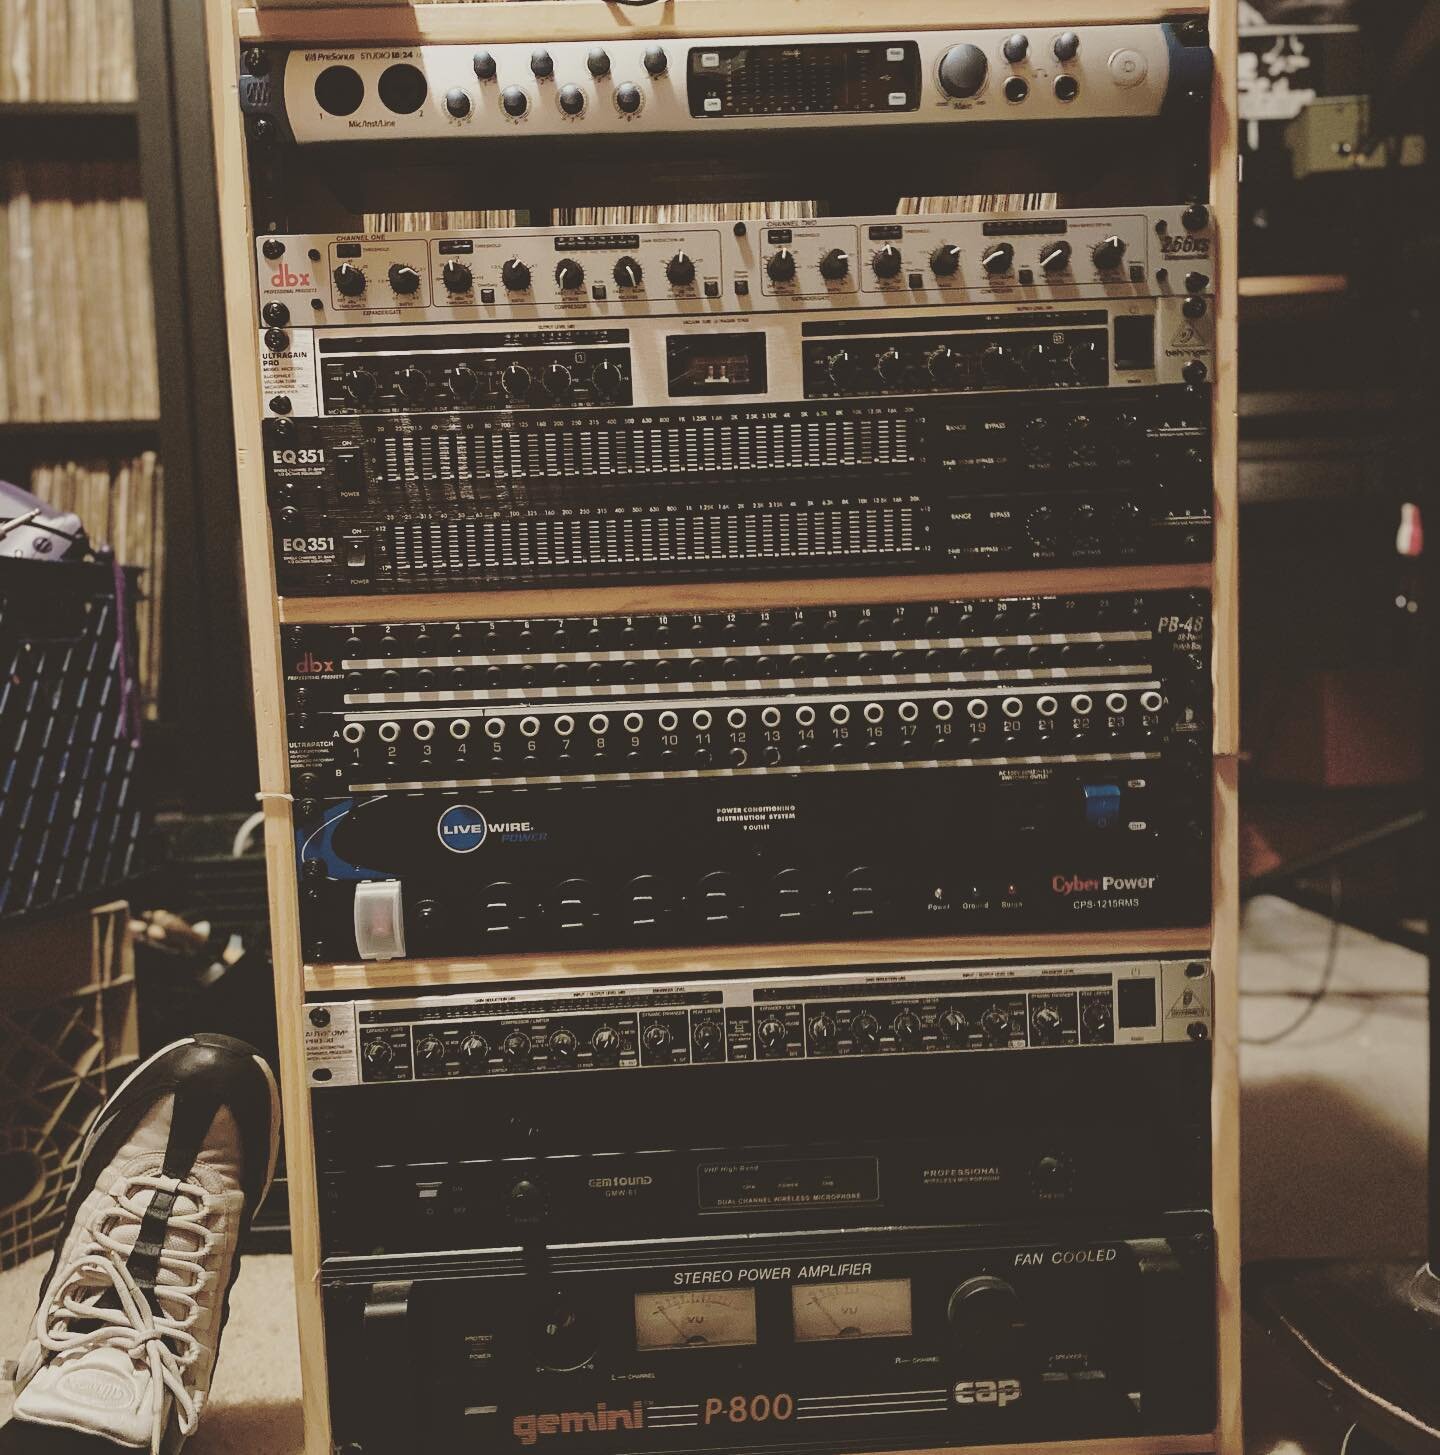 Doing the not so fun part of having a studio &hellip;&hellip;&hellip;.. changing out wires, re-arrange the rack, alphabetize the records , moving furniture around 

All to make sure the vibe is right😉

#cappylandrecords